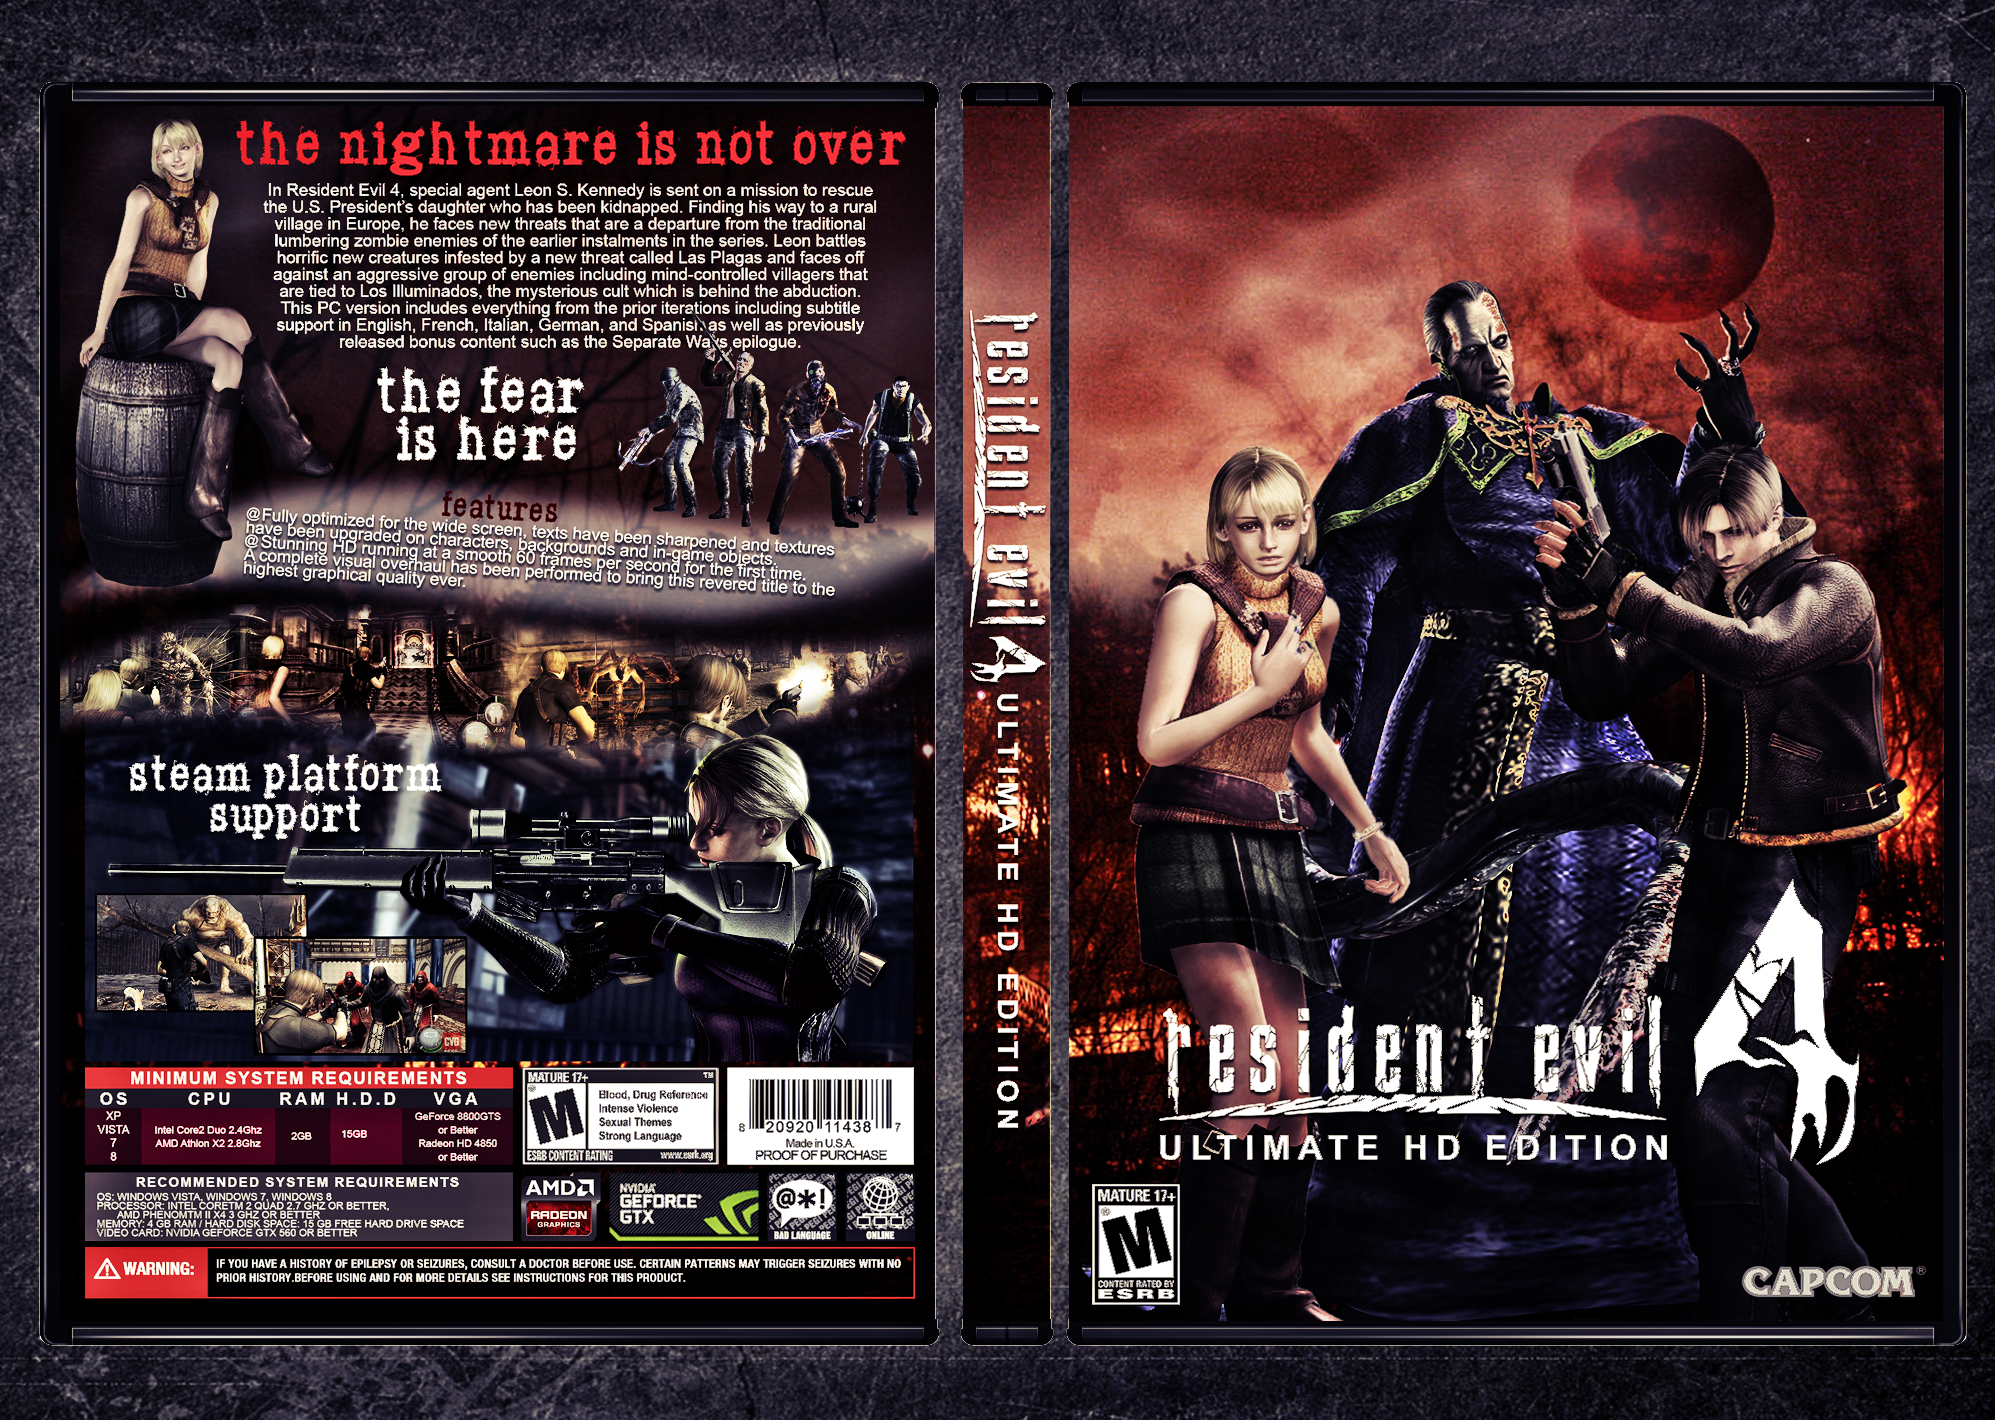 Resident Evil 4 Ultimate HD Edition box art cover. 